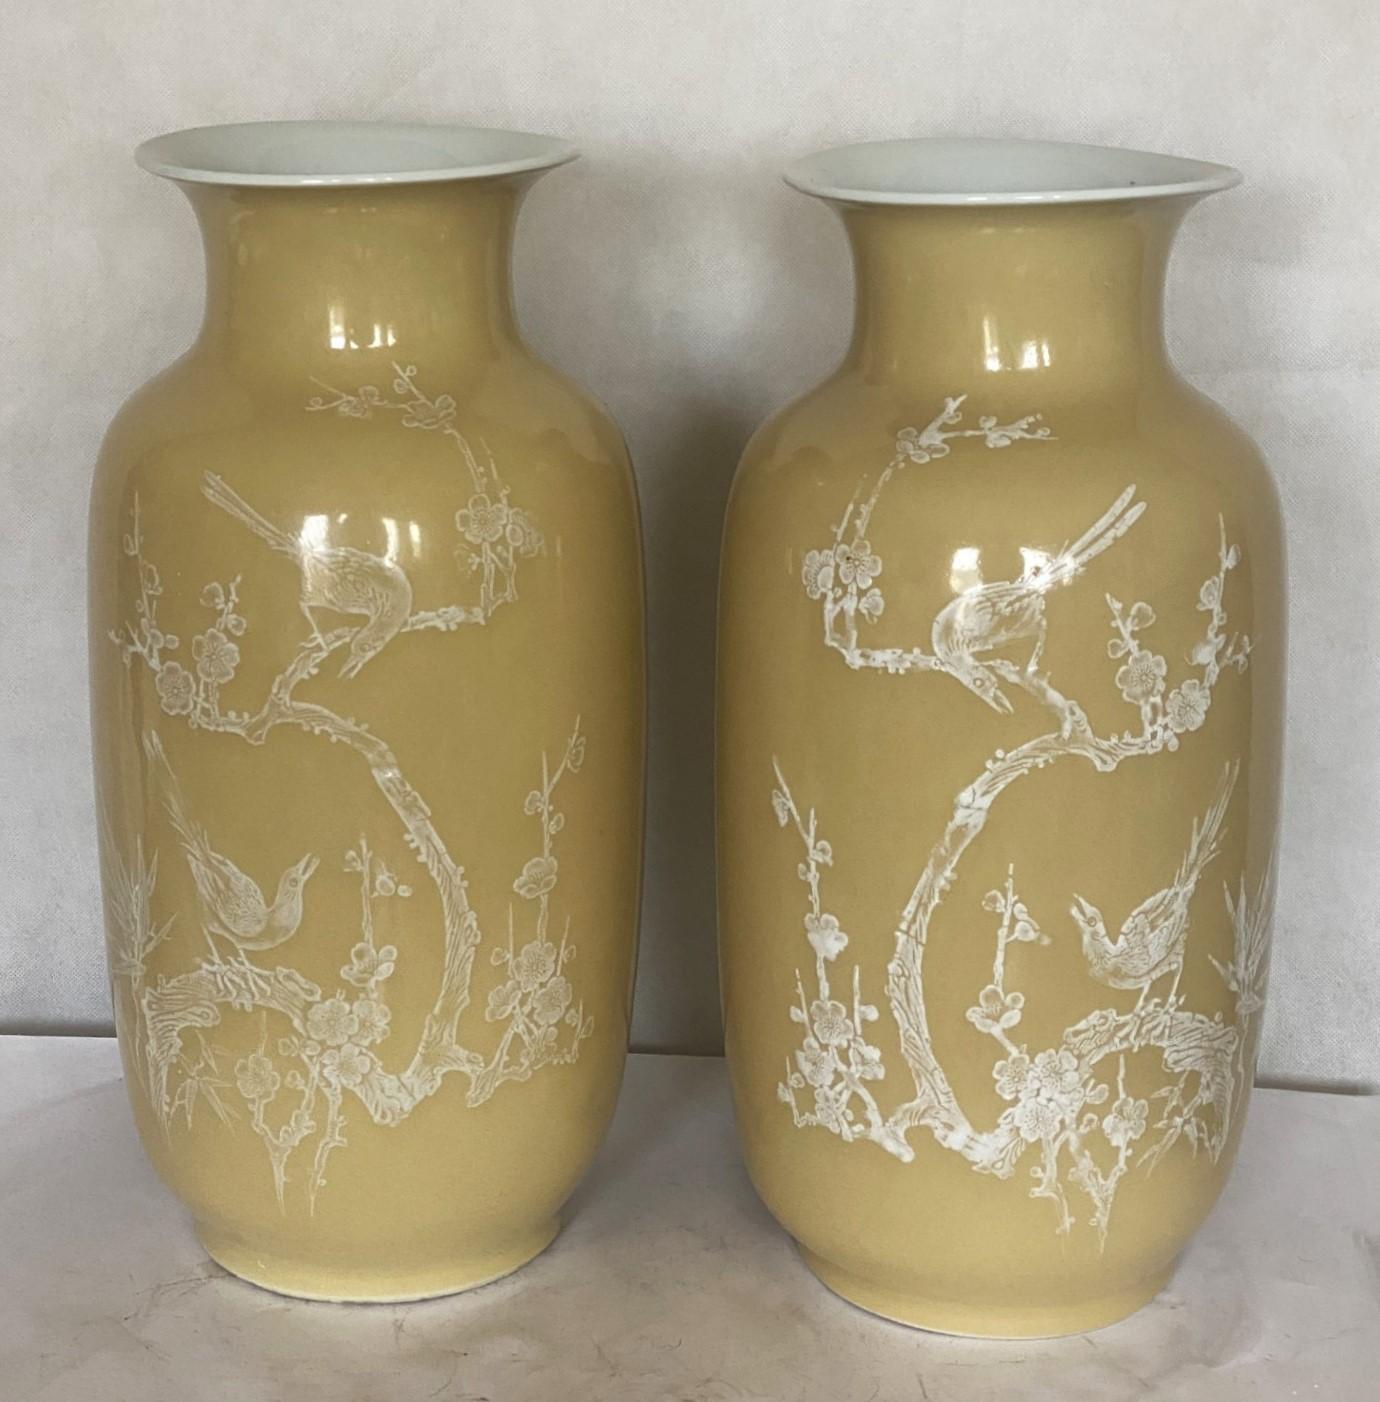 A pair of large, fine Chinese glazed porcelain vases, China, early 20th century. Yellow-ground beautifuly decorated with white  hand-painted in embroidery look birds and floral motifs on both sides. Each vase is marked at the bottom. 
Condition: